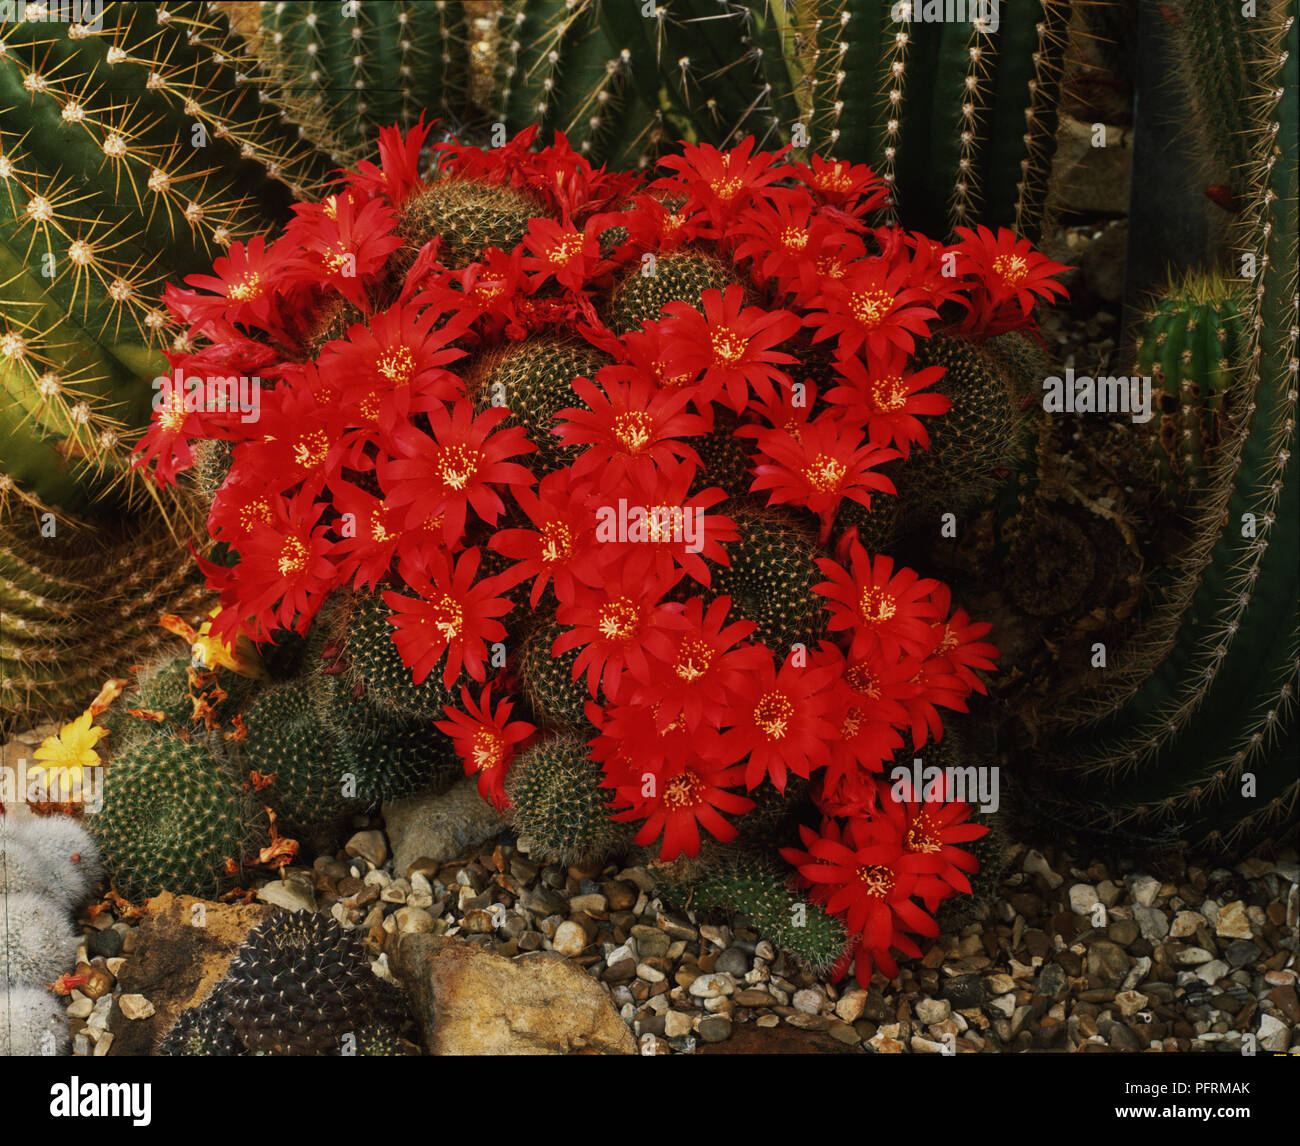 Rebutia wessneriana cactus with bright red flowers Stock Photo